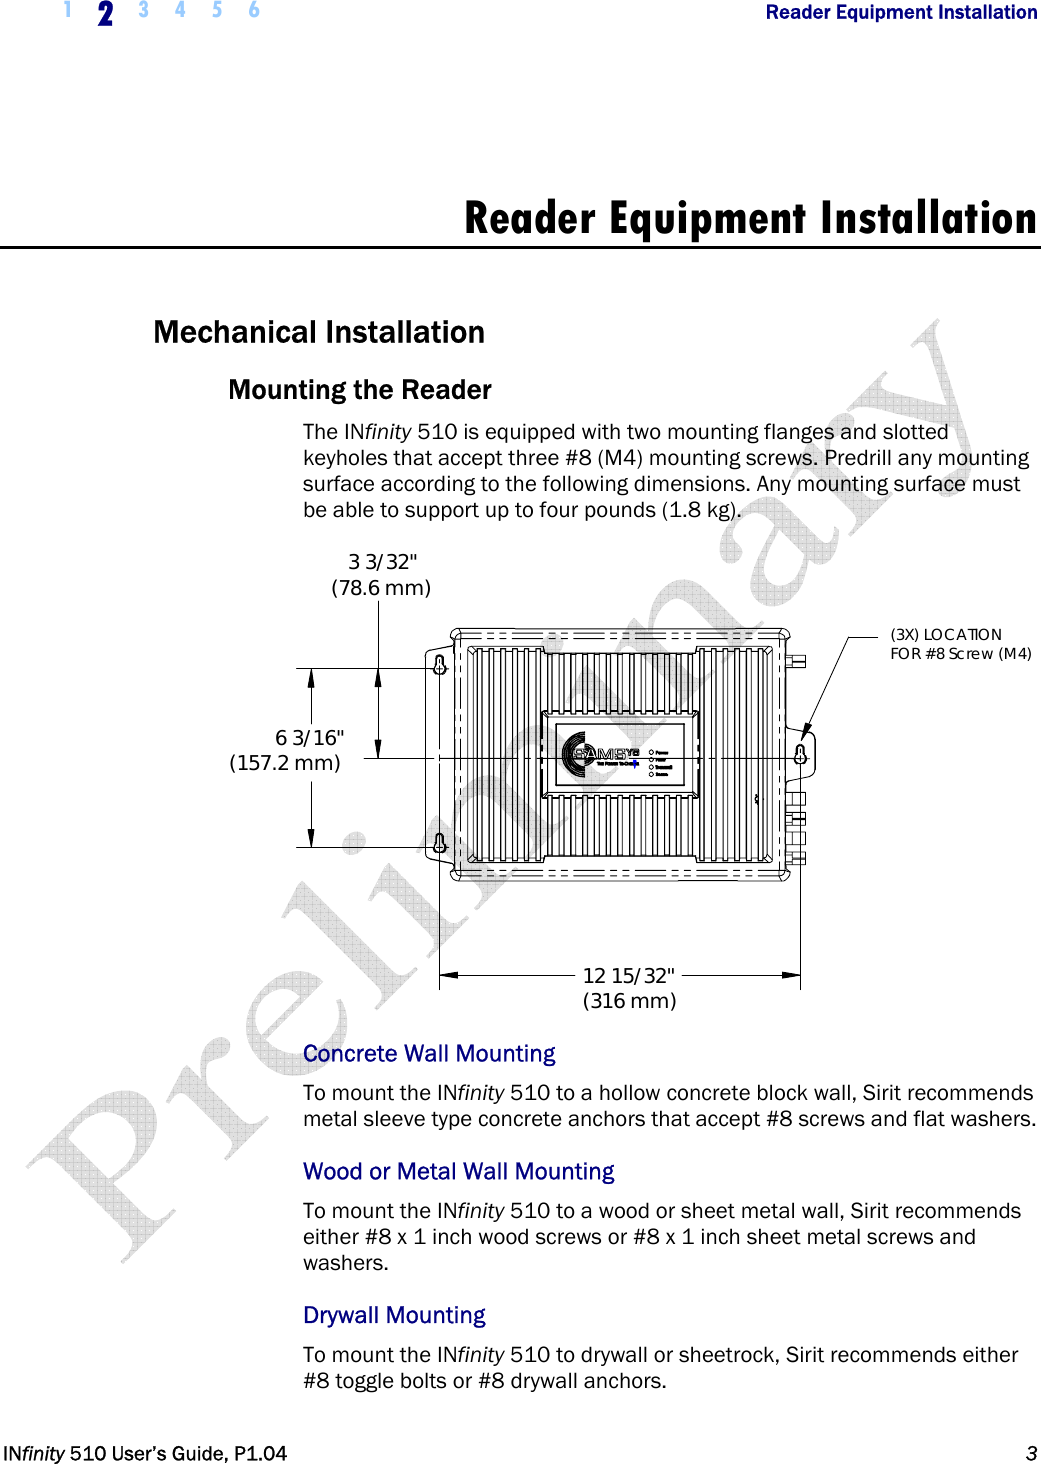  1  2  3 4 5 6                Reader Equipment Installation   INfinity 510 User’s Guide, P1.04  3   Reader Equipment Installation  Mechanical Installation Mounting the Reader The INfinity 510 is equipped with two mounting flanges and slotted keyholes that accept three #8 (M4) mounting screws. Predrill any mounting surface according to the following dimensions. Any mounting surface must be able to support up to four pounds (1.8 kg). 6 3/16&quot;(157.2 mm)12 15/32&quot;(316 mm)3 3/32&quot;(78.6 mm)(3X) LOCATIONFOR #8 Screw (M4) Concrete Wall Mounting To mount the INfinity 510 to a hollow concrete block wall, Sirit recommends metal sleeve type concrete anchors that accept #8 screws and flat washers. Wood or Metal Wall Mounting To mount the INfinity 510 to a wood or sheet metal wall, Sirit recommends either #8 x 1 inch wood screws or #8 x 1 inch sheet metal screws and washers. Drywall Mounting To mount the INfinity 510 to drywall or sheetrock, Sirit recommends either #8 toggle bolts or #8 drywall anchors.  